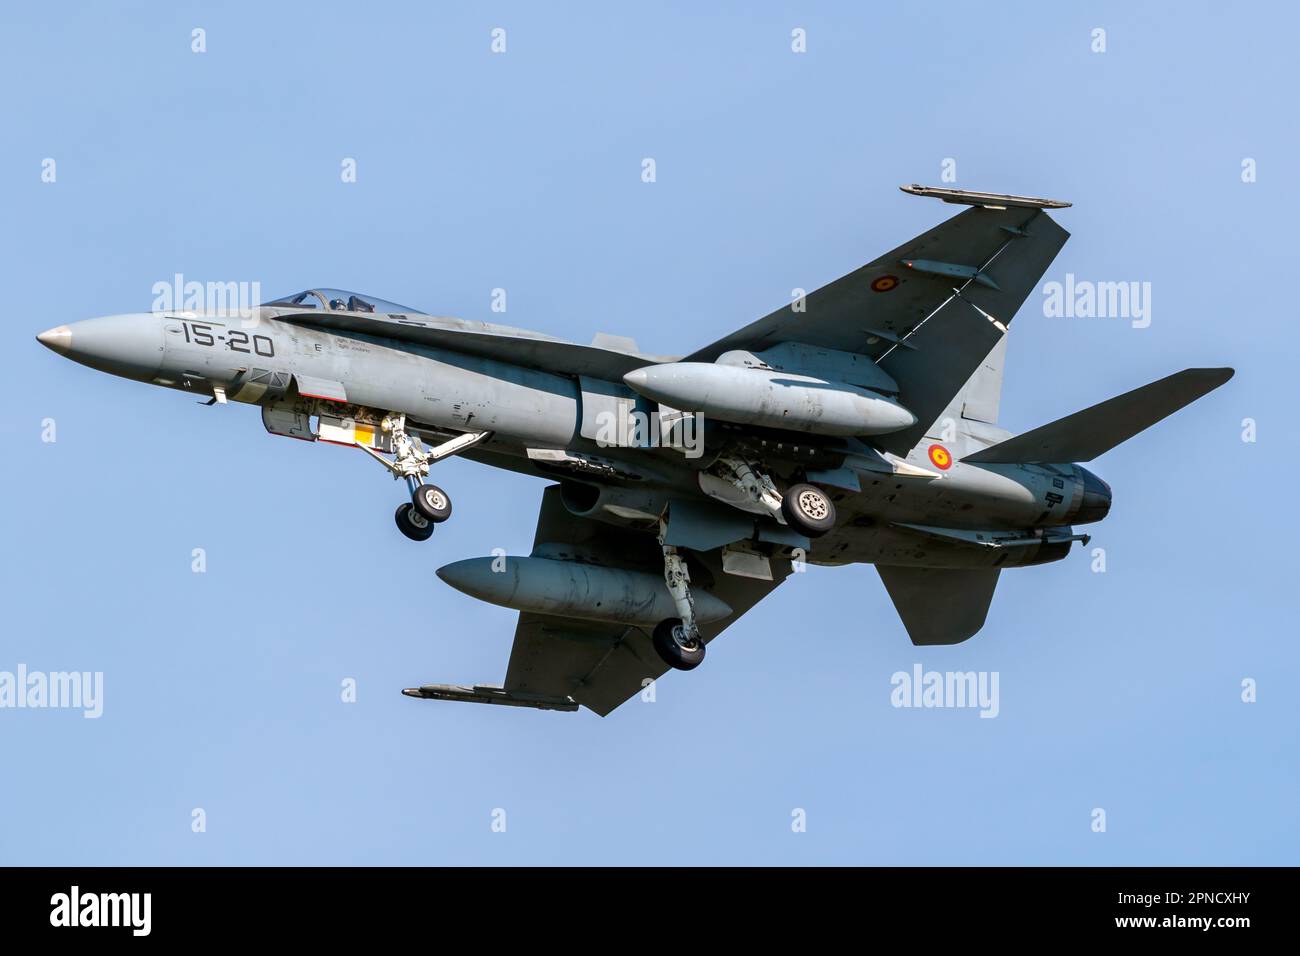 Spanish Air Force Boeing F/A-18 Hornet fighter jet aircraft arriving at Leeuwarden Air Base. Leeuwarden, The Netherlands - April 19, 2018 Stock Photo